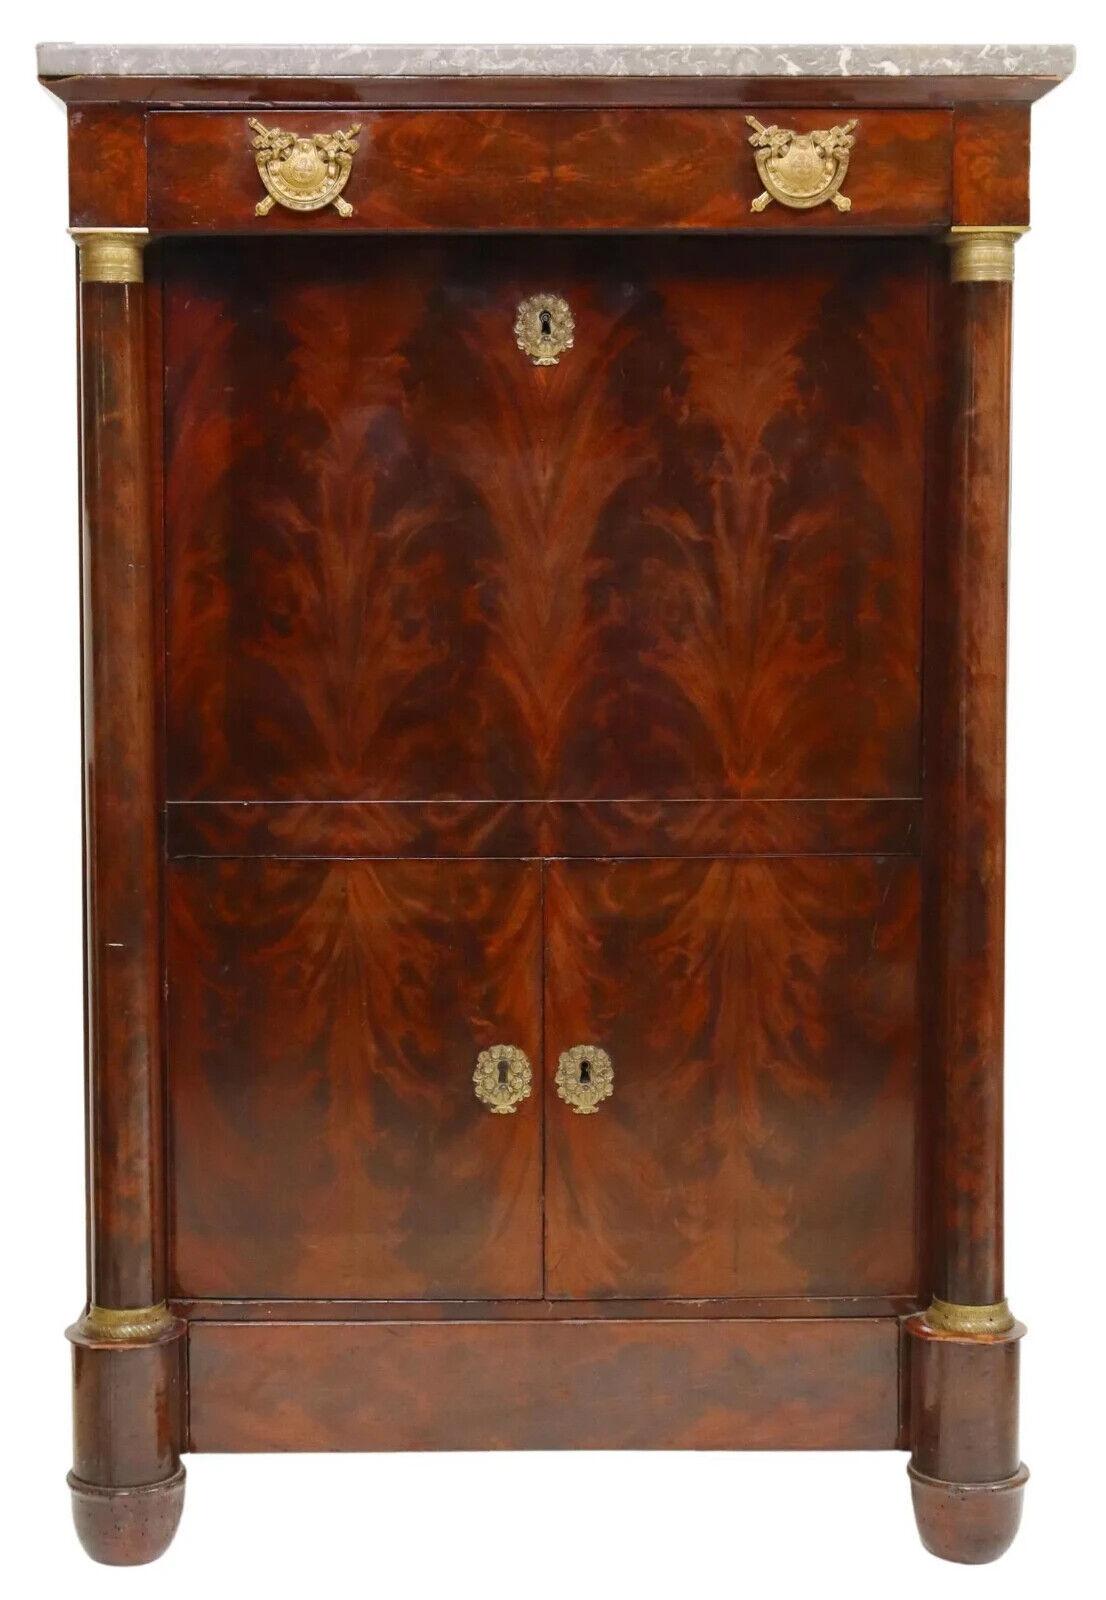 Gorgeous antique secretaire a abattant, desk, French Empire style, mahogany, gilt, 1800s, 19th century!

This stunning French Empire style marble-top mahogany fall-front desk, 19th century, projecting frieze drawer, with gilt metal crossed sword